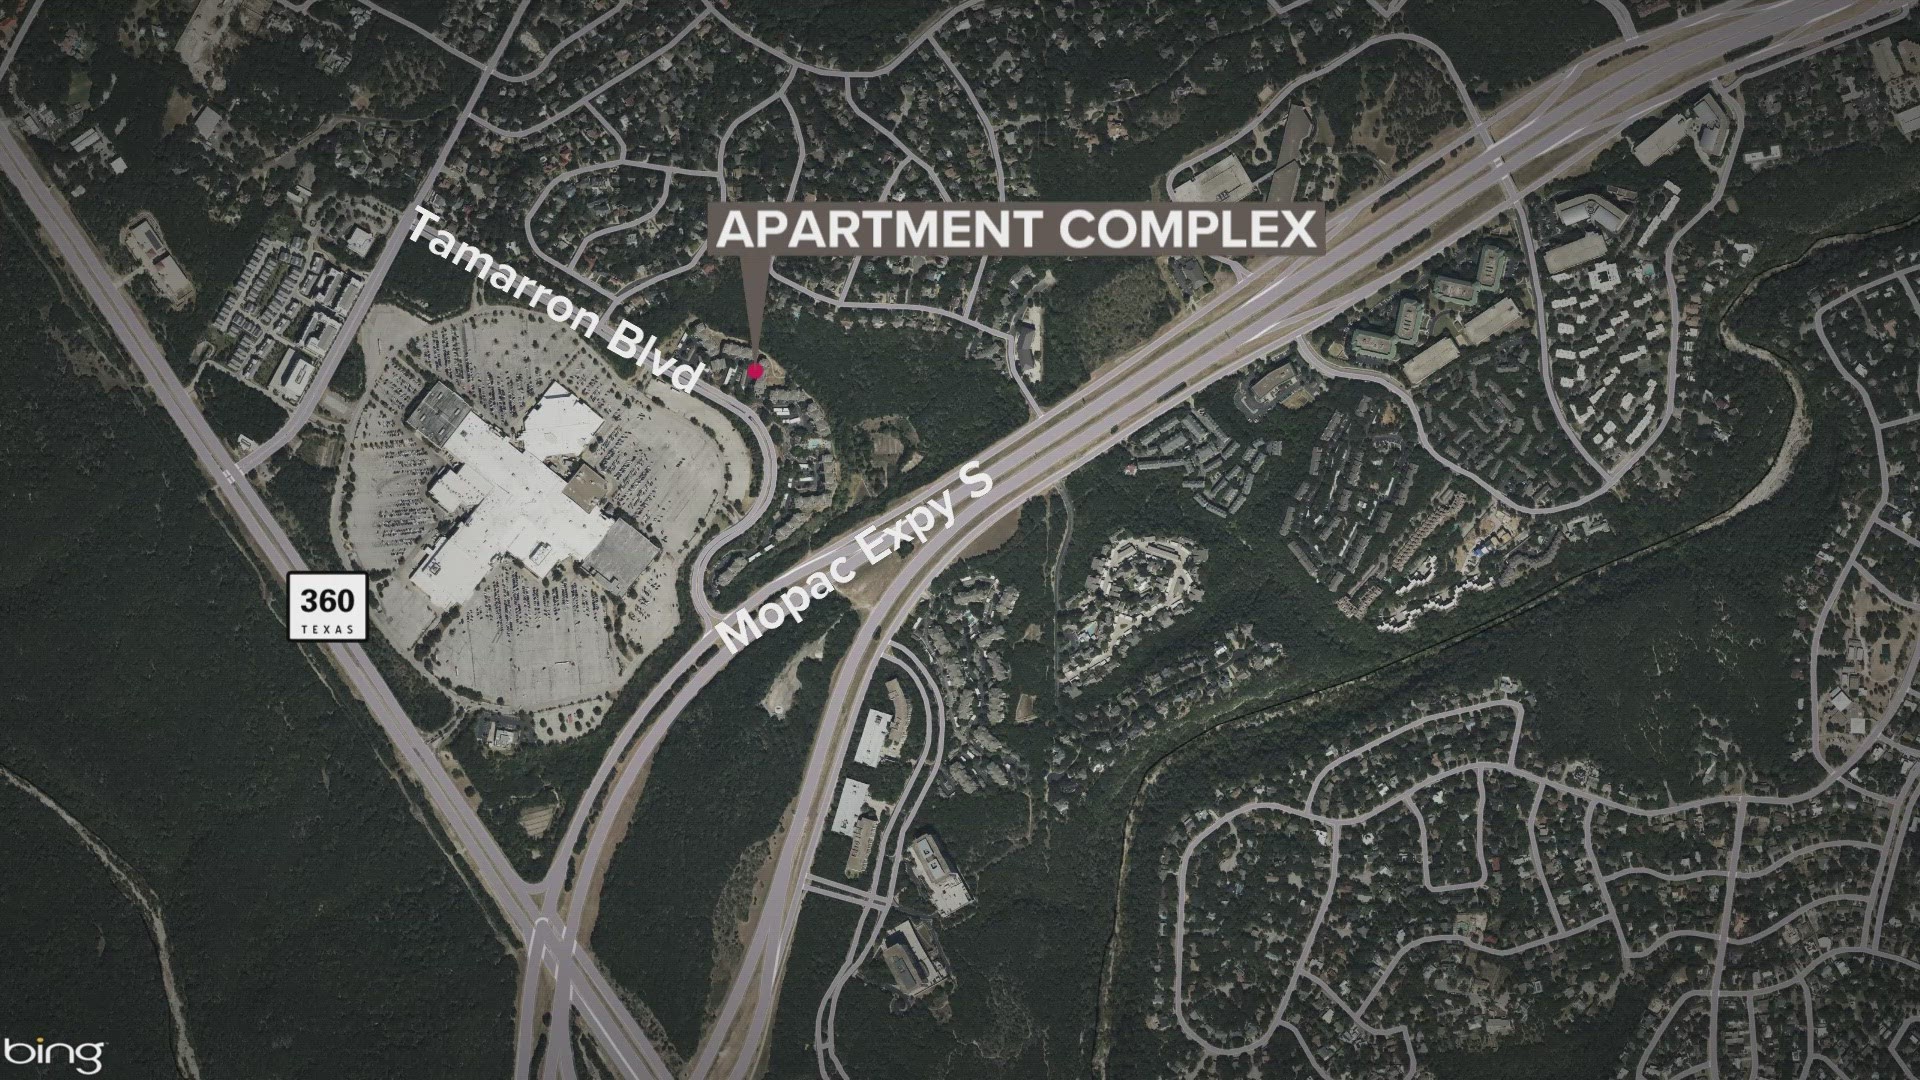 The shooting happened at approximately 2 a.m. Saturday at an apartment complex in the southwest Austin area.